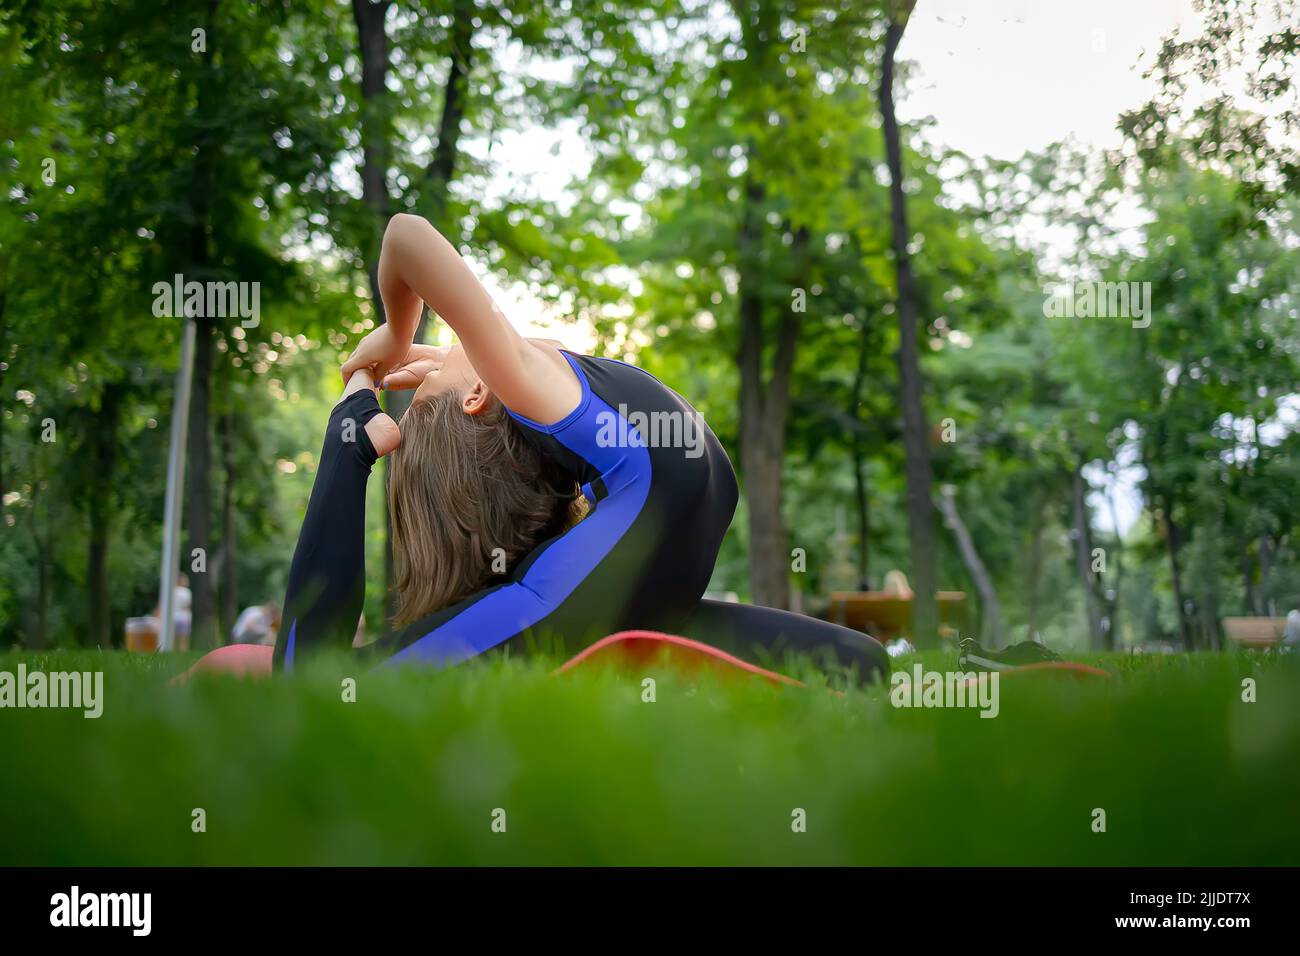 a little girl sitting on the lawn in the park performs backbends she does yoga elements to stretch her back Stock Photo